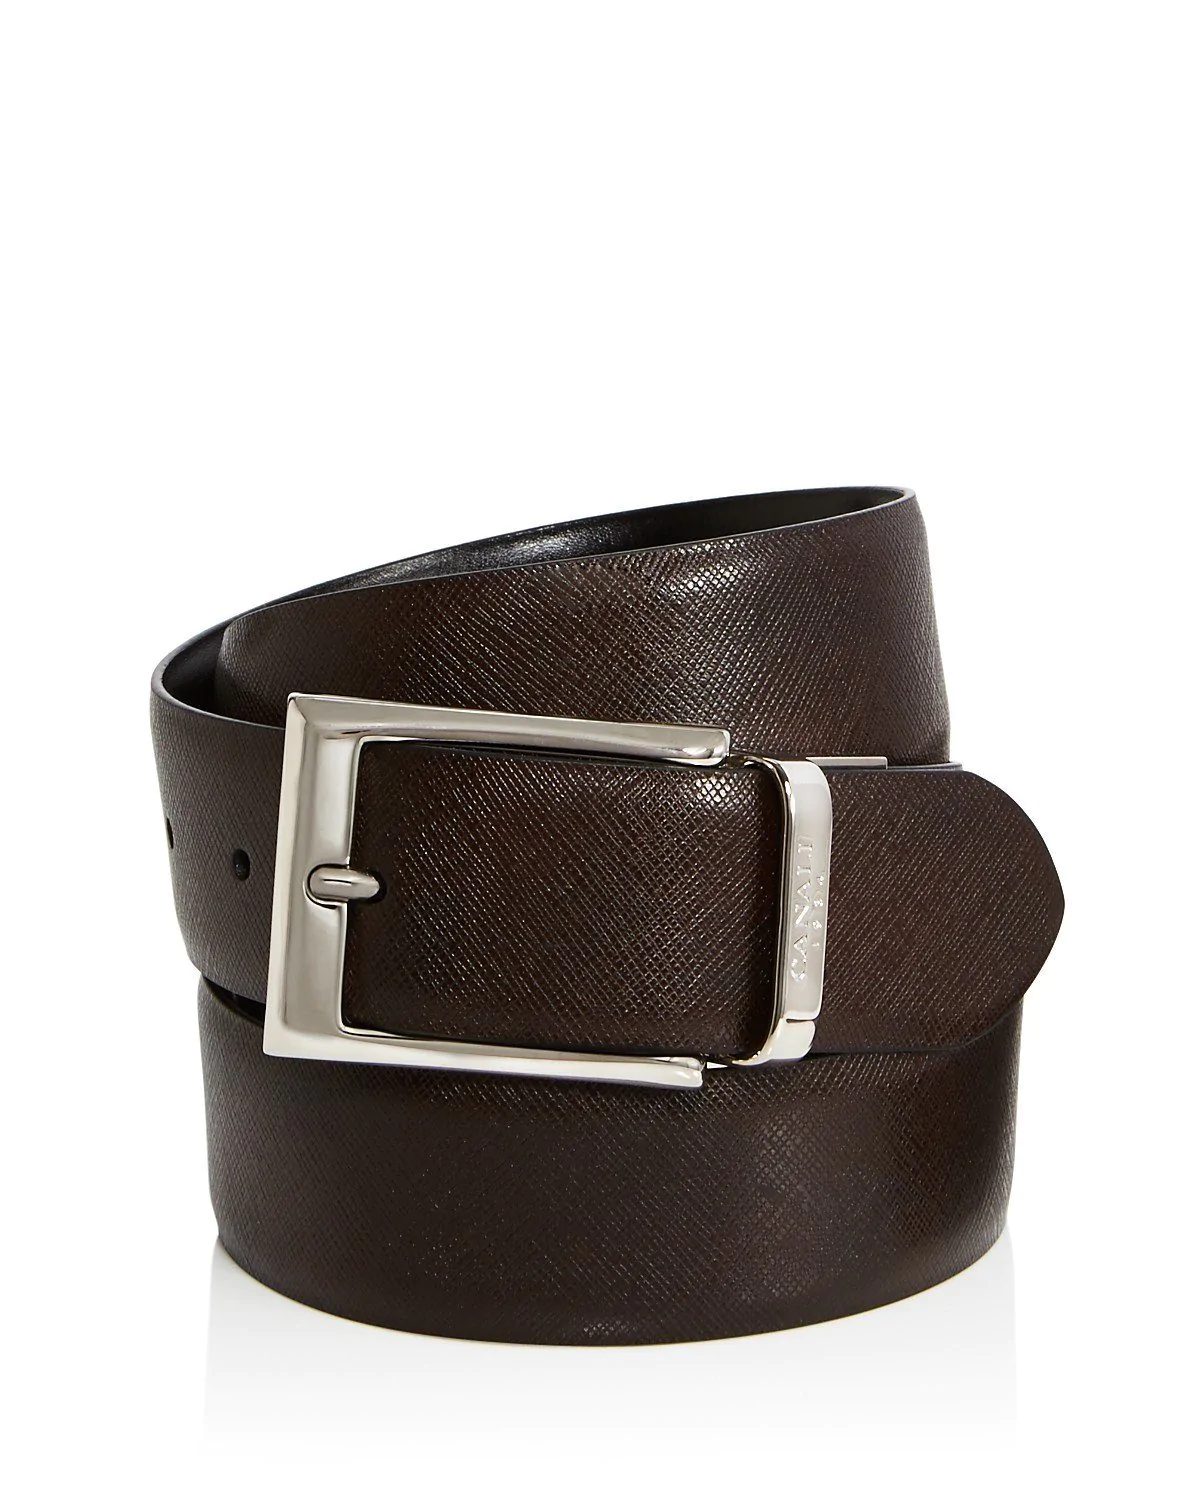 CANALI Reversible Leather Belt